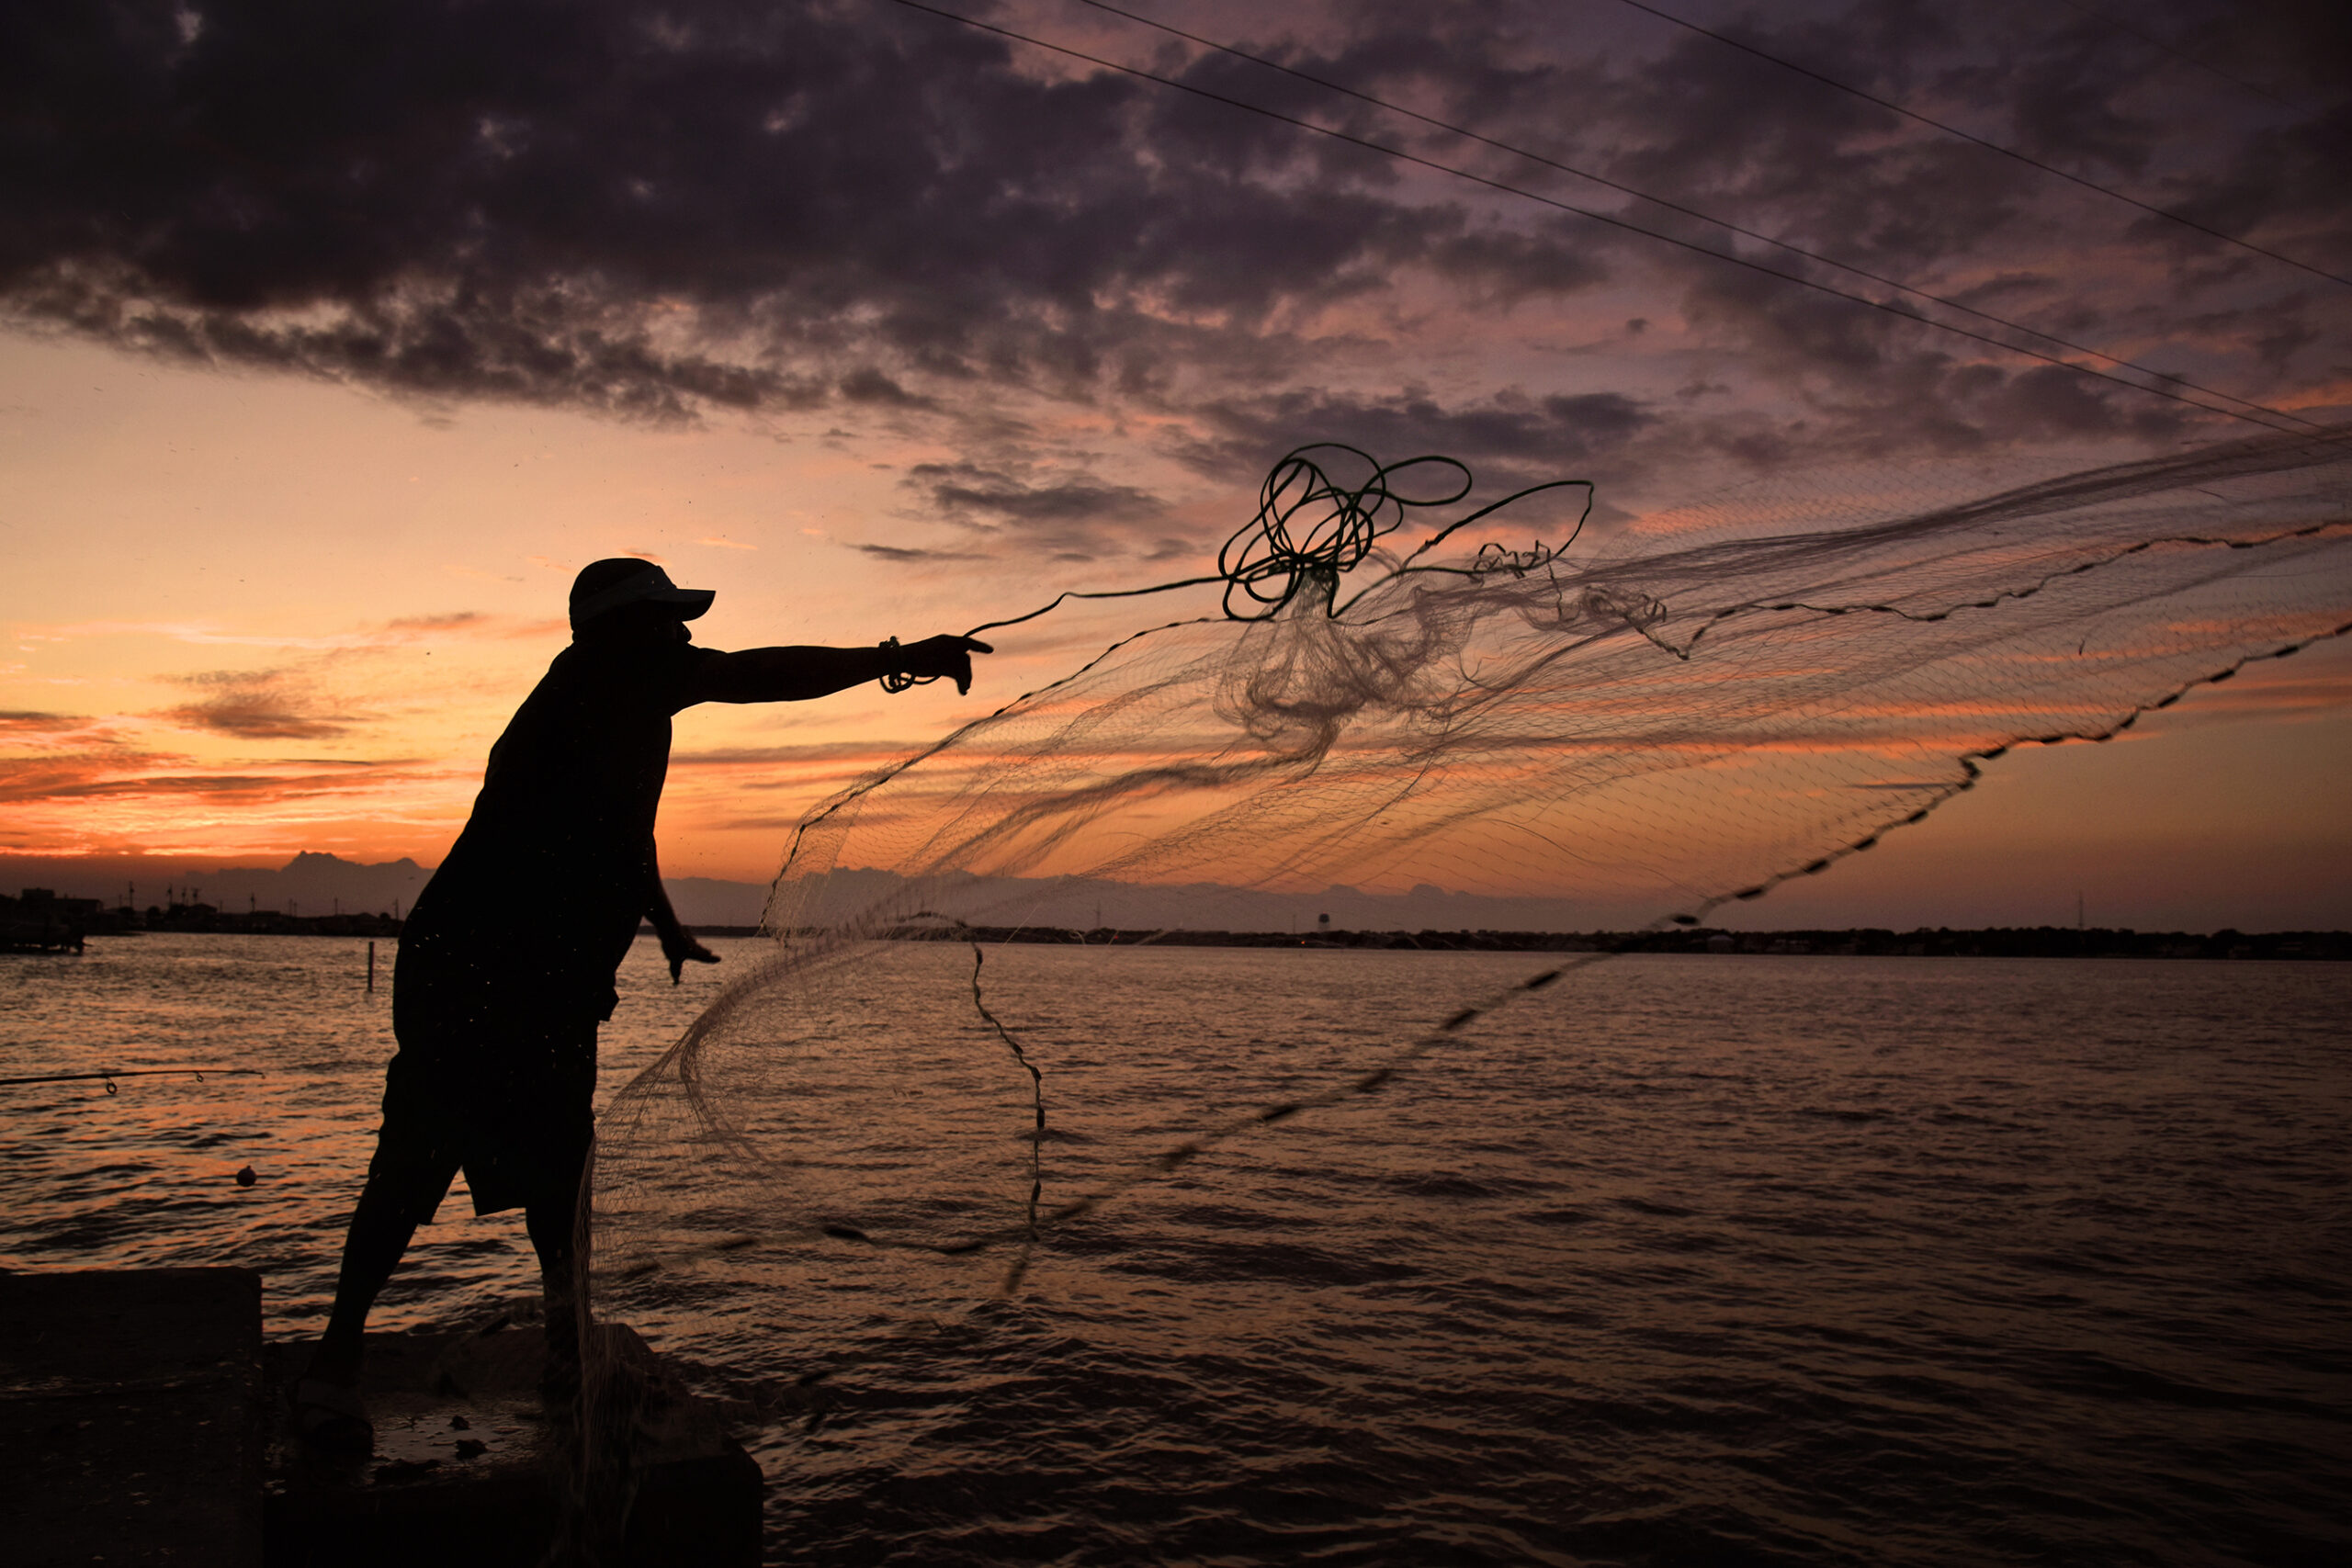 A silhouette casting a net at sunset